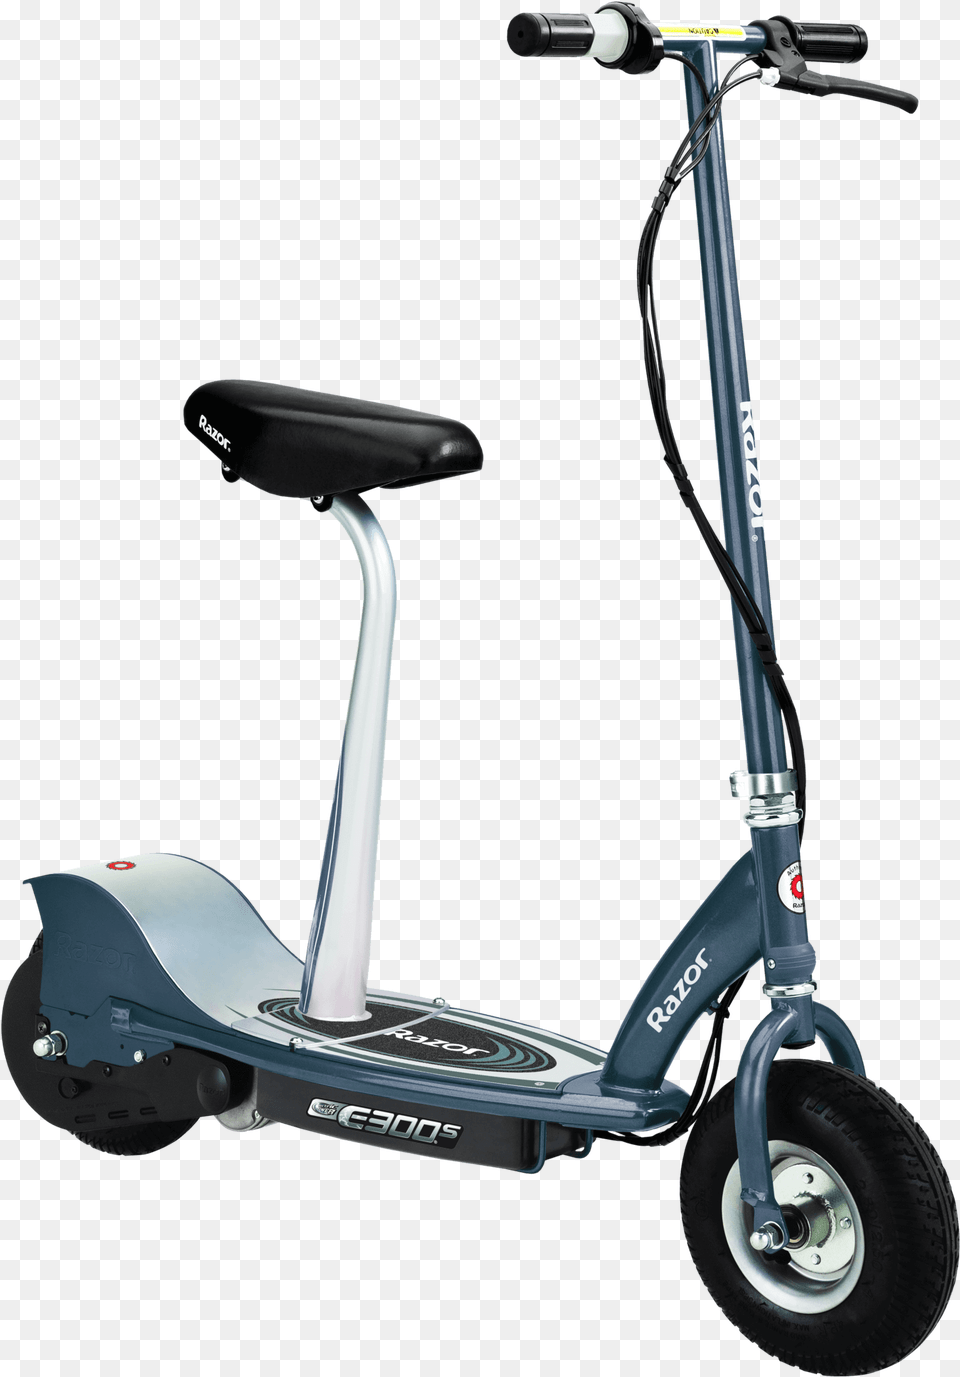 Razor Scooter Electric Scooter Price In India, Transportation, Vehicle, E-scooter, Machine Png Image